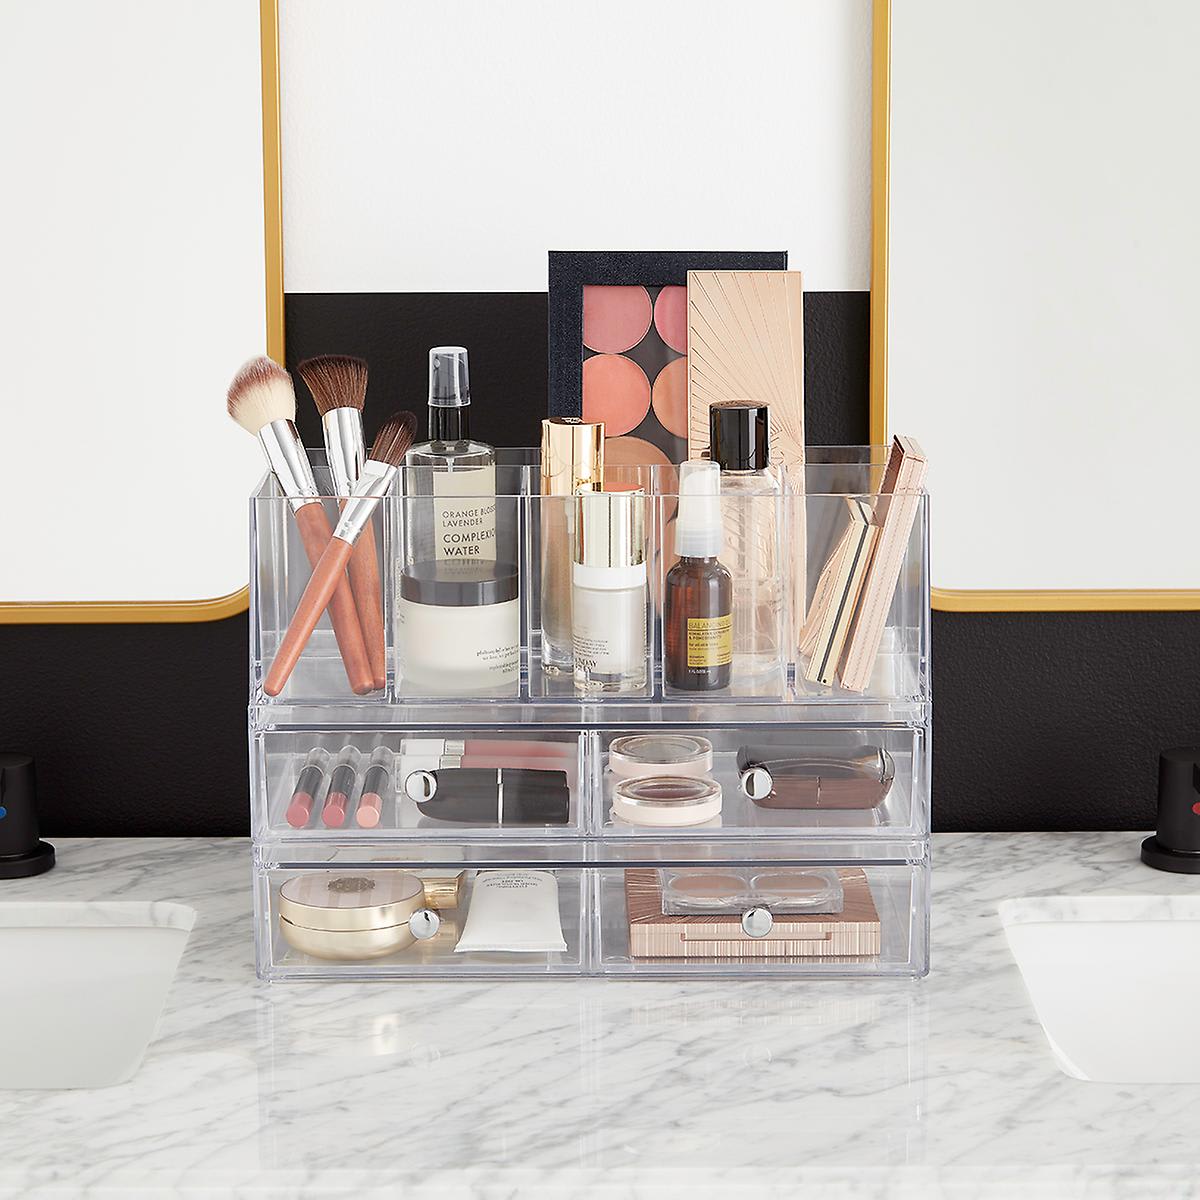 Cosmetic Organizers/Storage Solutions/Drawers - Makeup Storage Ideas